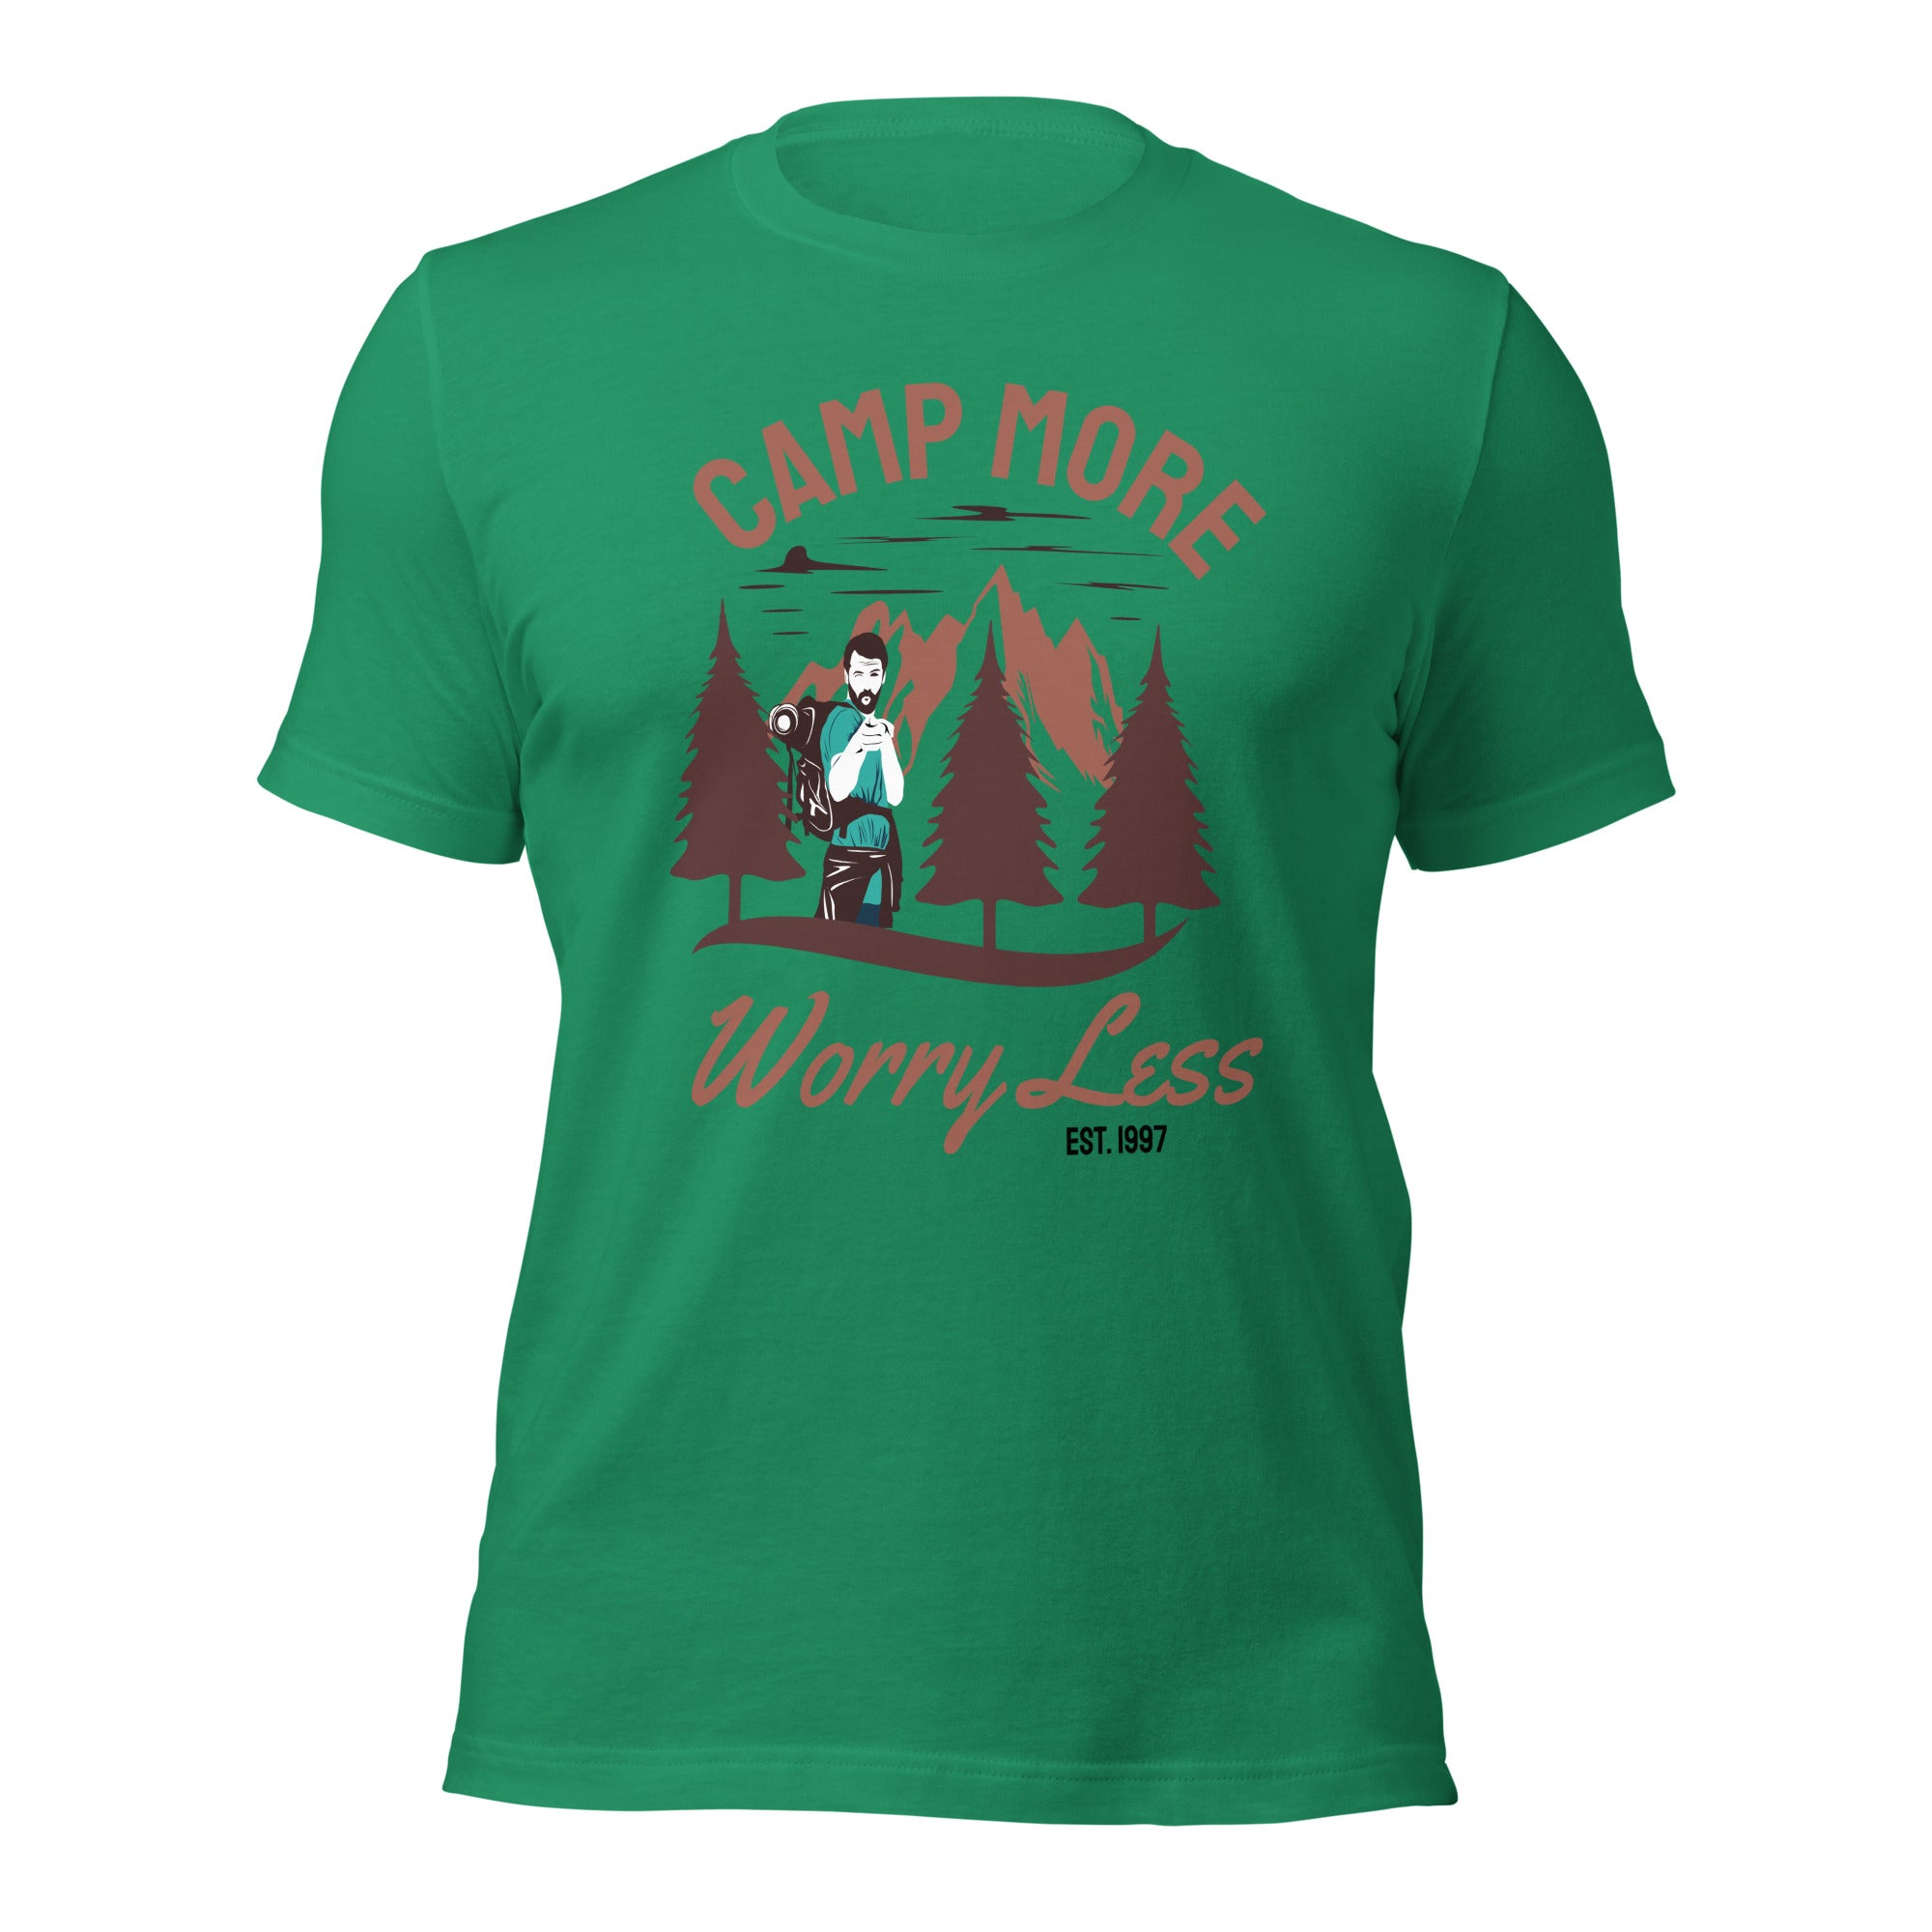 Camp More Worry Less T-Shirt